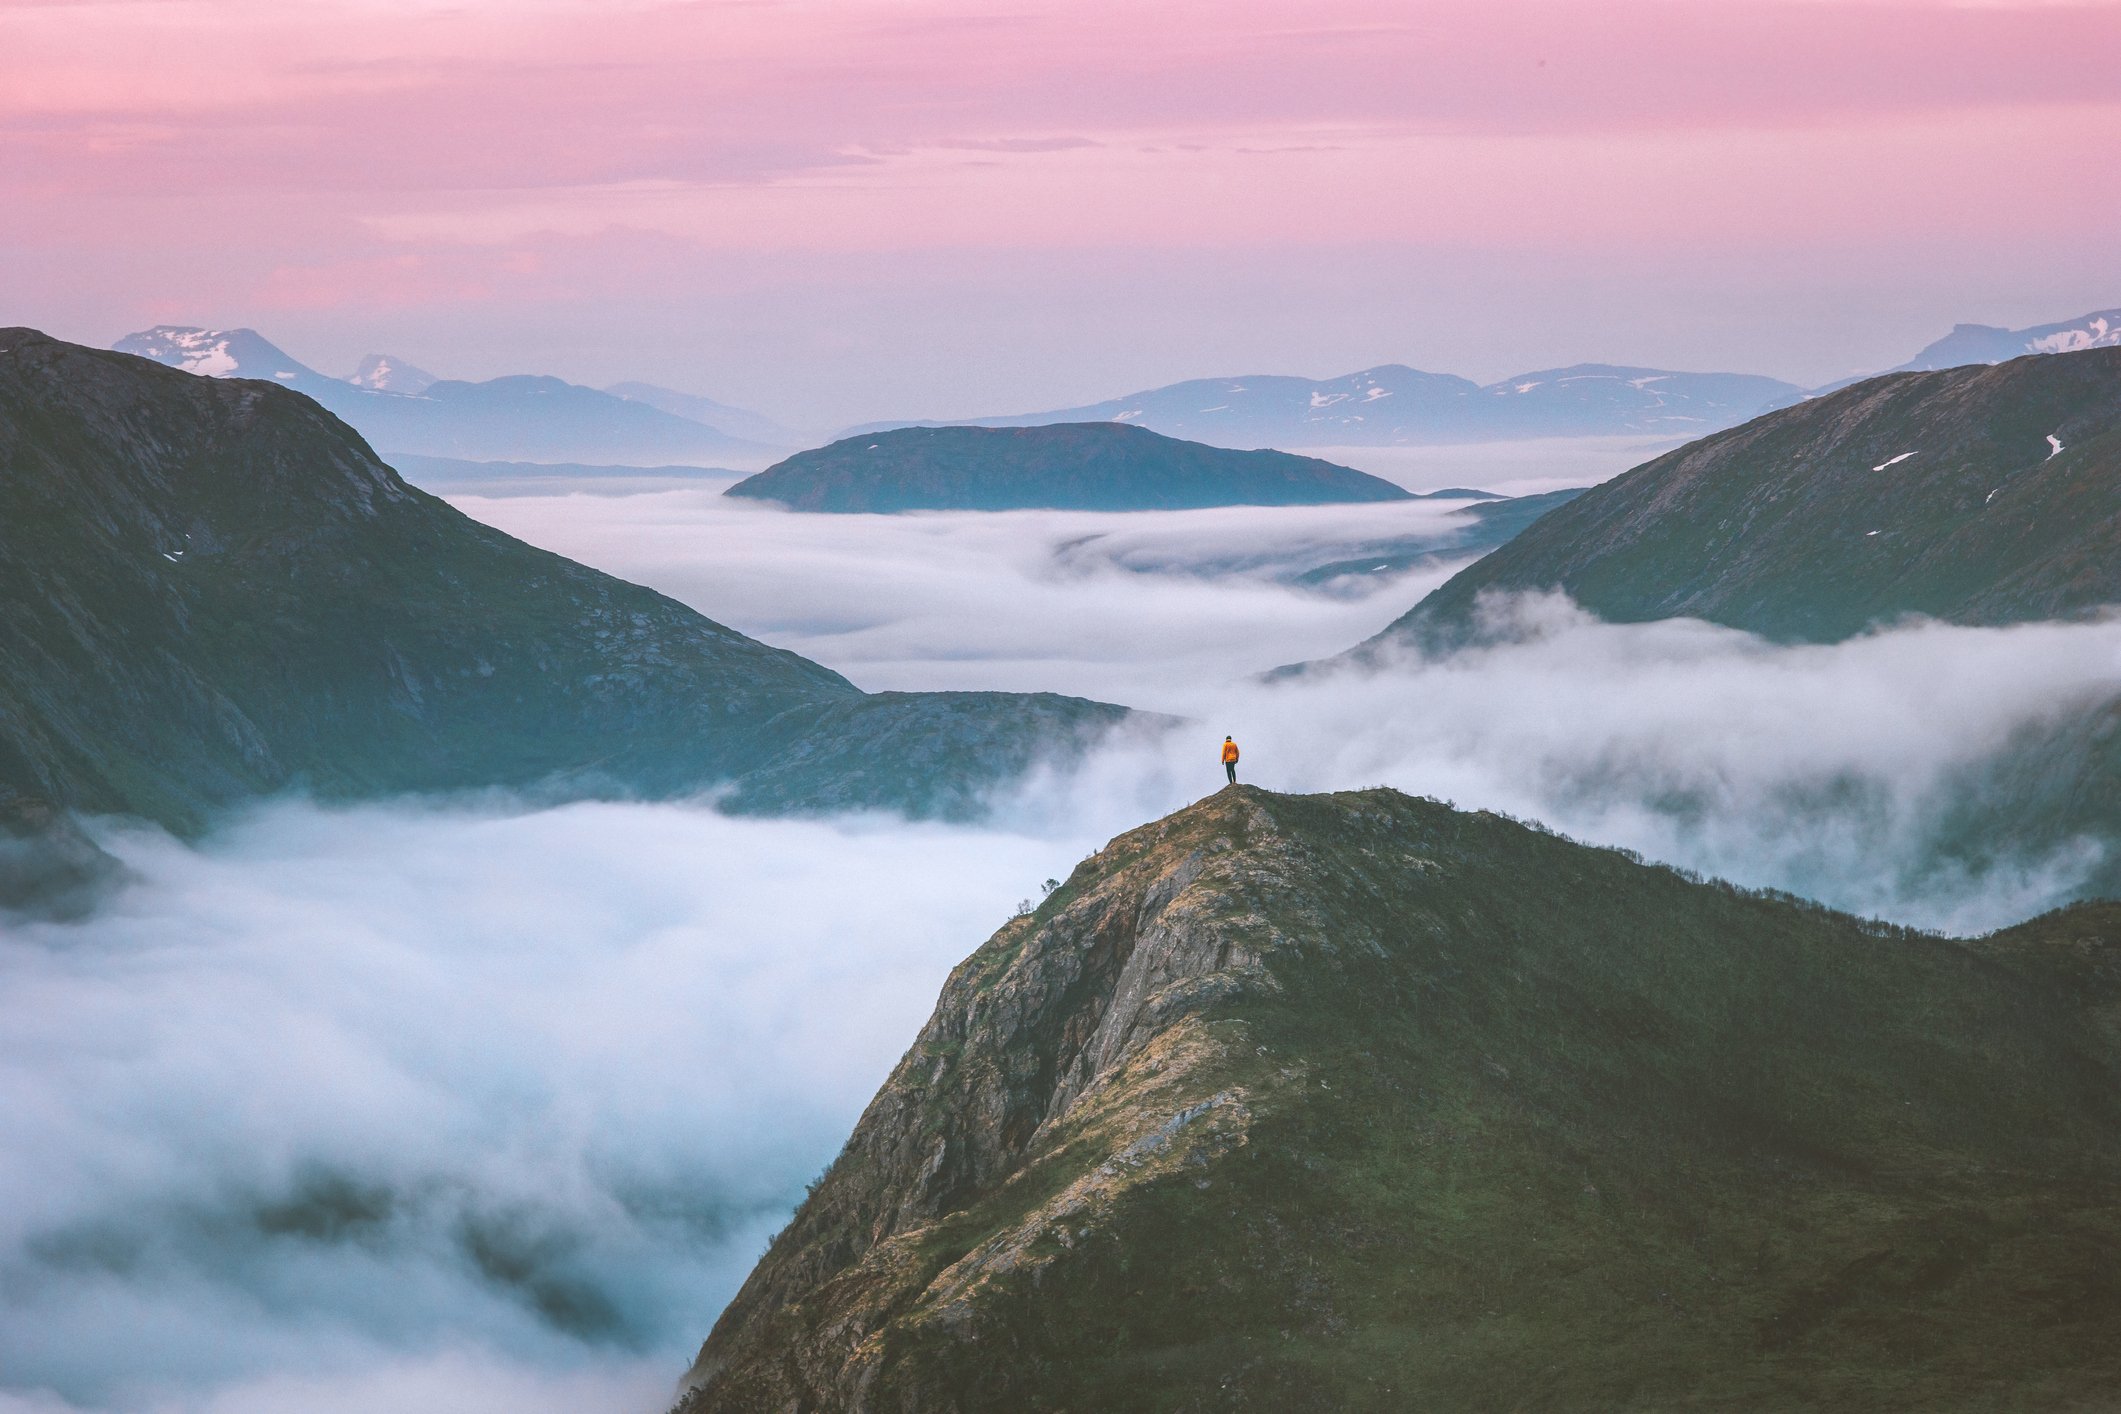 photo of a hiker on top of a mountain or hill peak look out toward the horizon over fog that cuts through other peaks